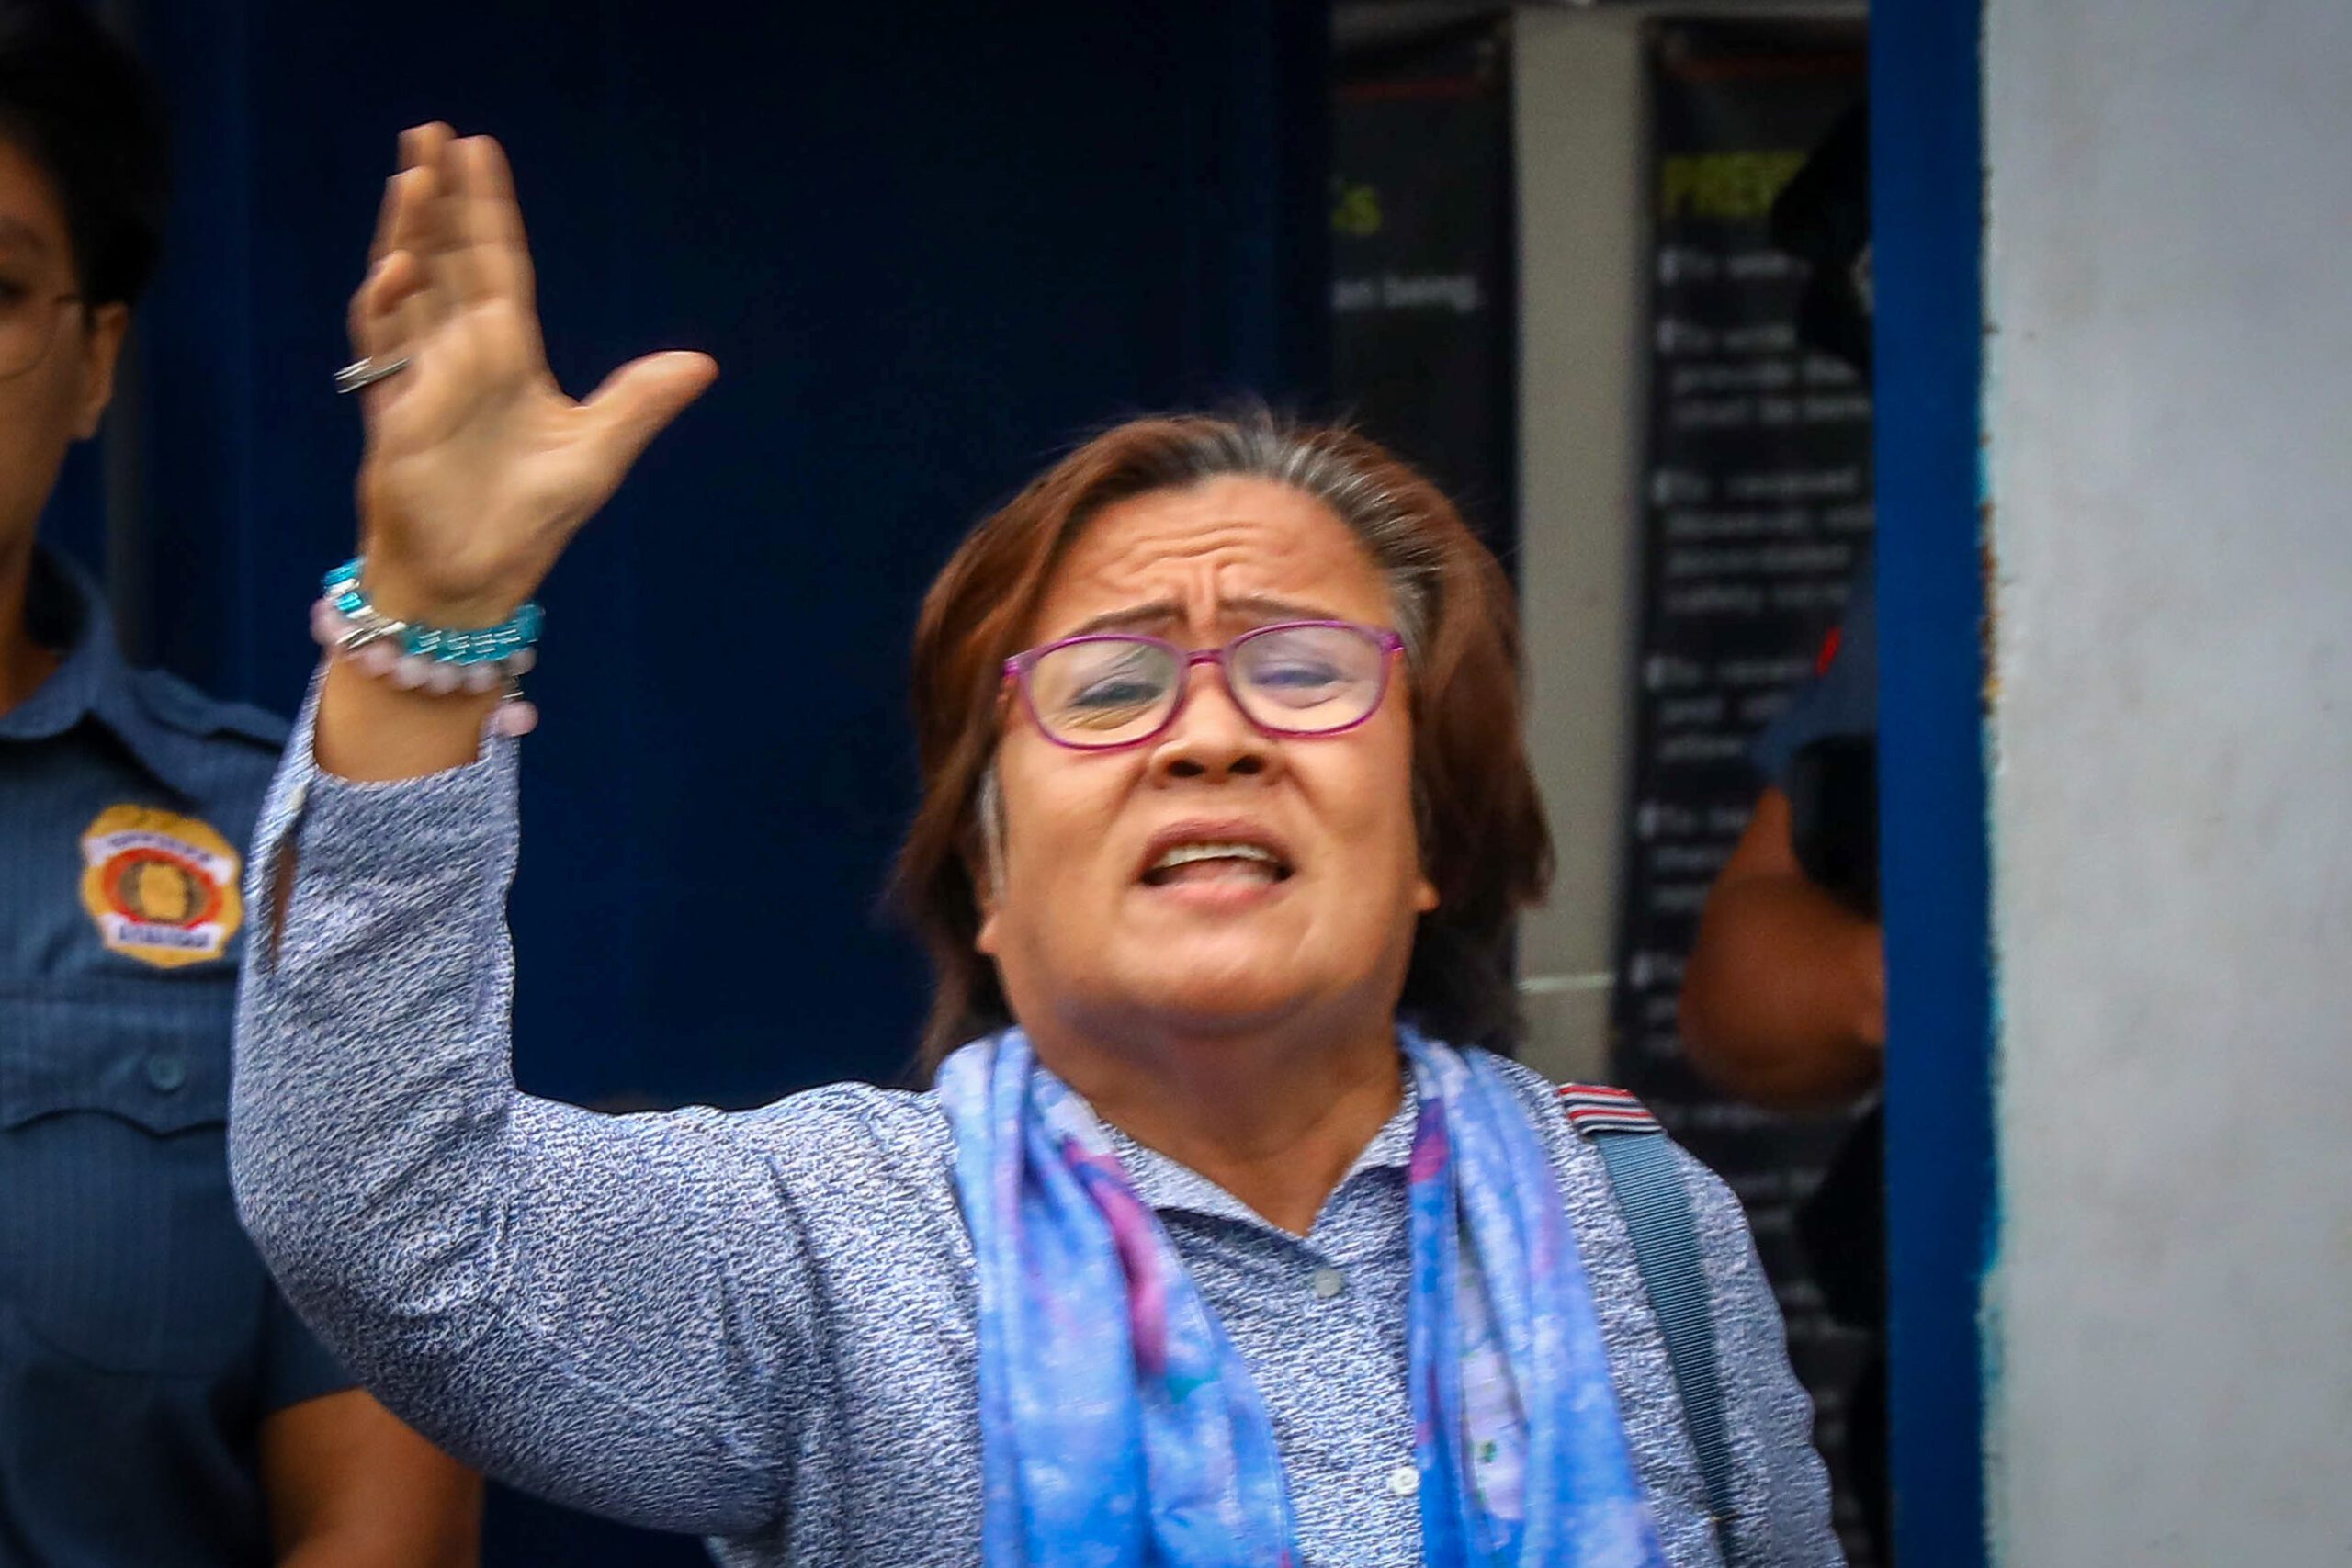 ‘Freedom,’ Leila de Lima says after being granted bail